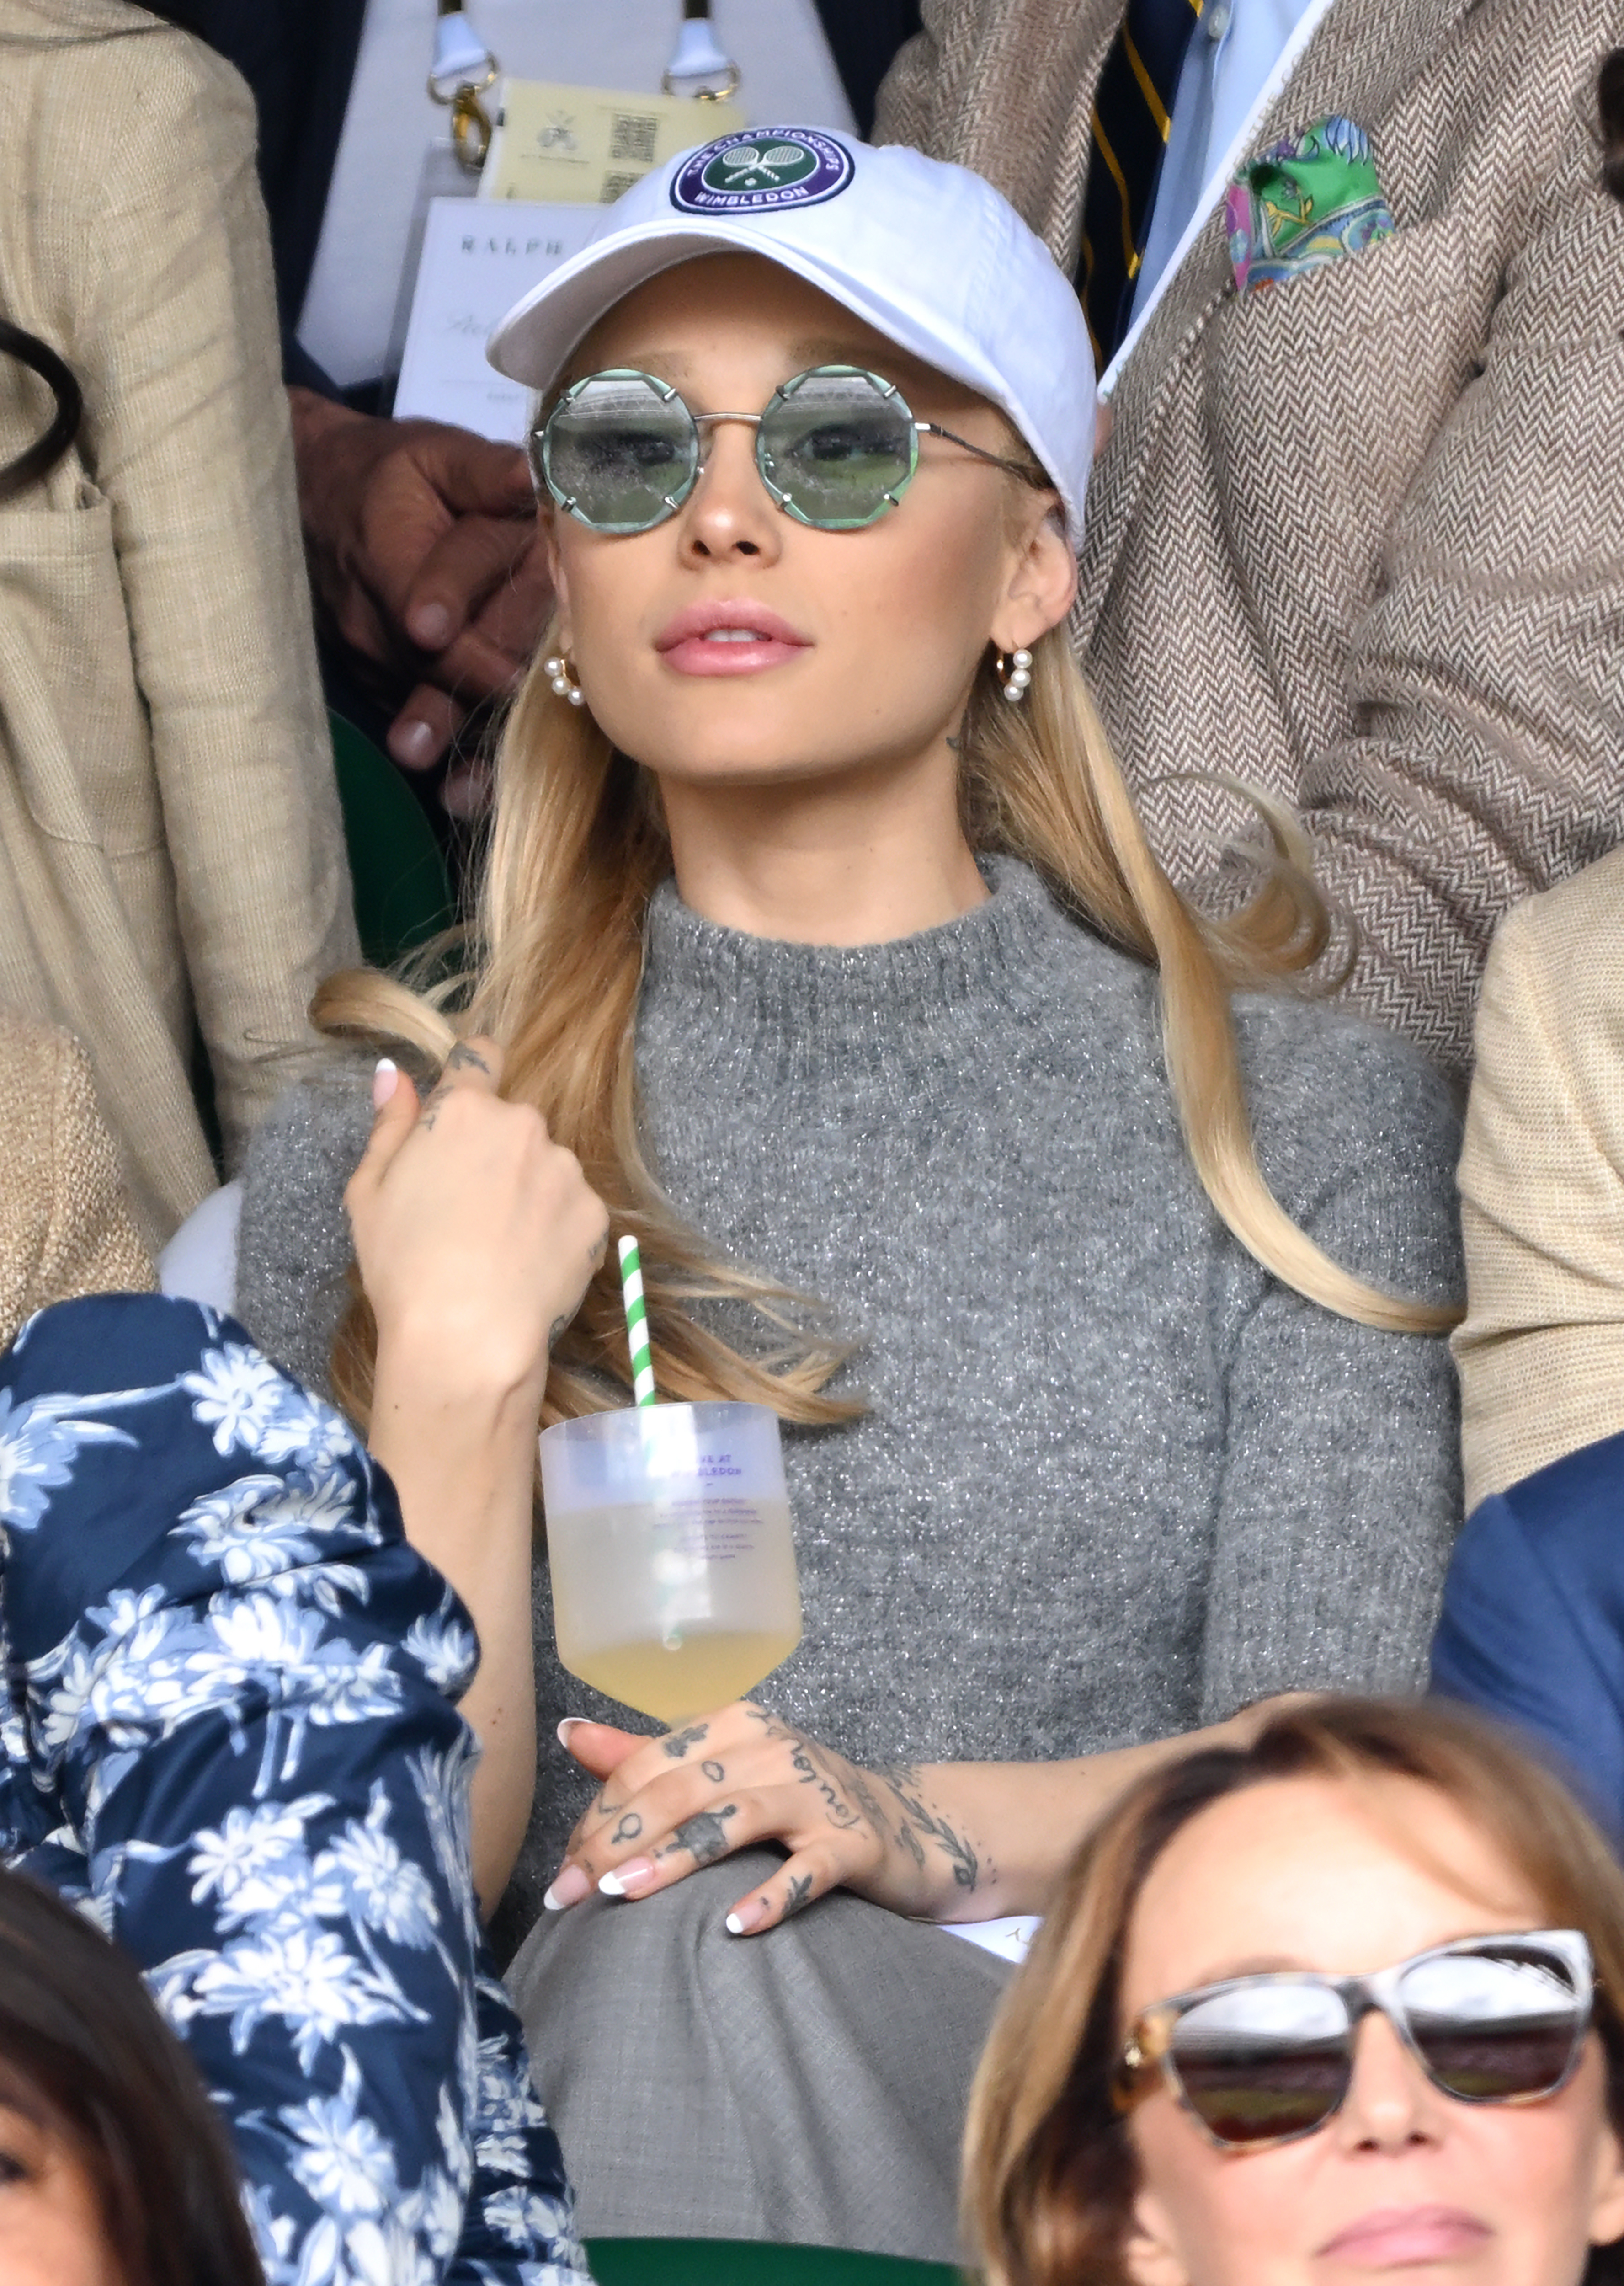 Ariana sits in the stands of a sporting event wearing a baseball cap and holding a cup